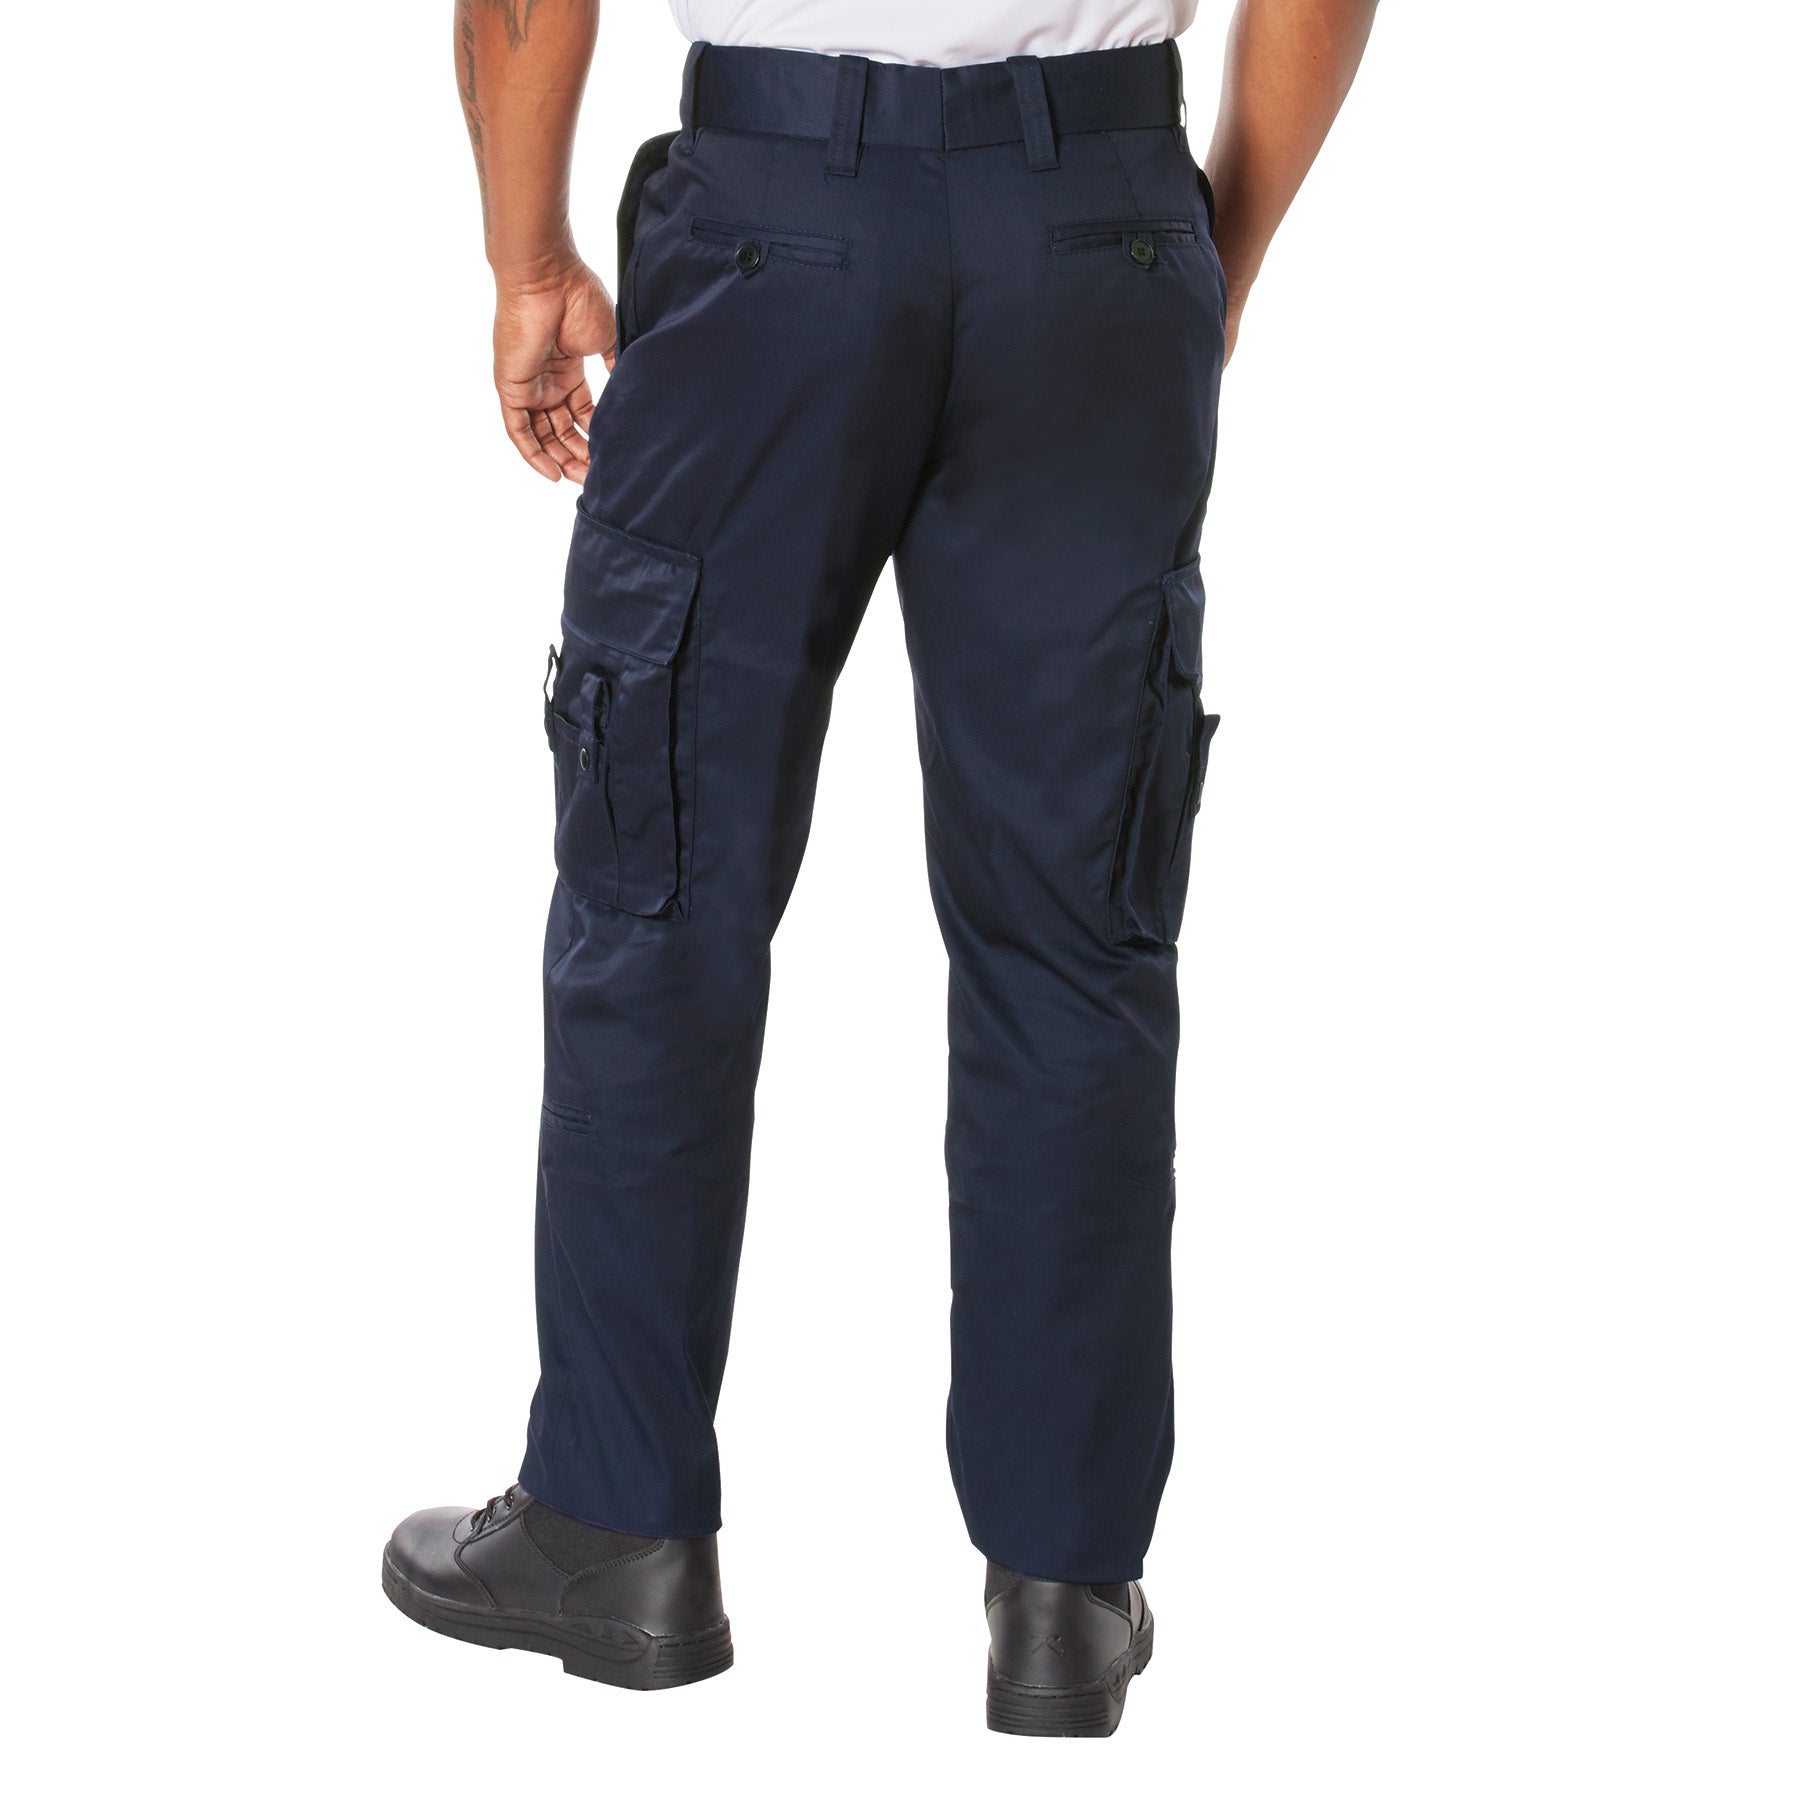 Deluxe EMT (Emergency Medical Technician) Paramedic Pants - Tactical Choice Plus